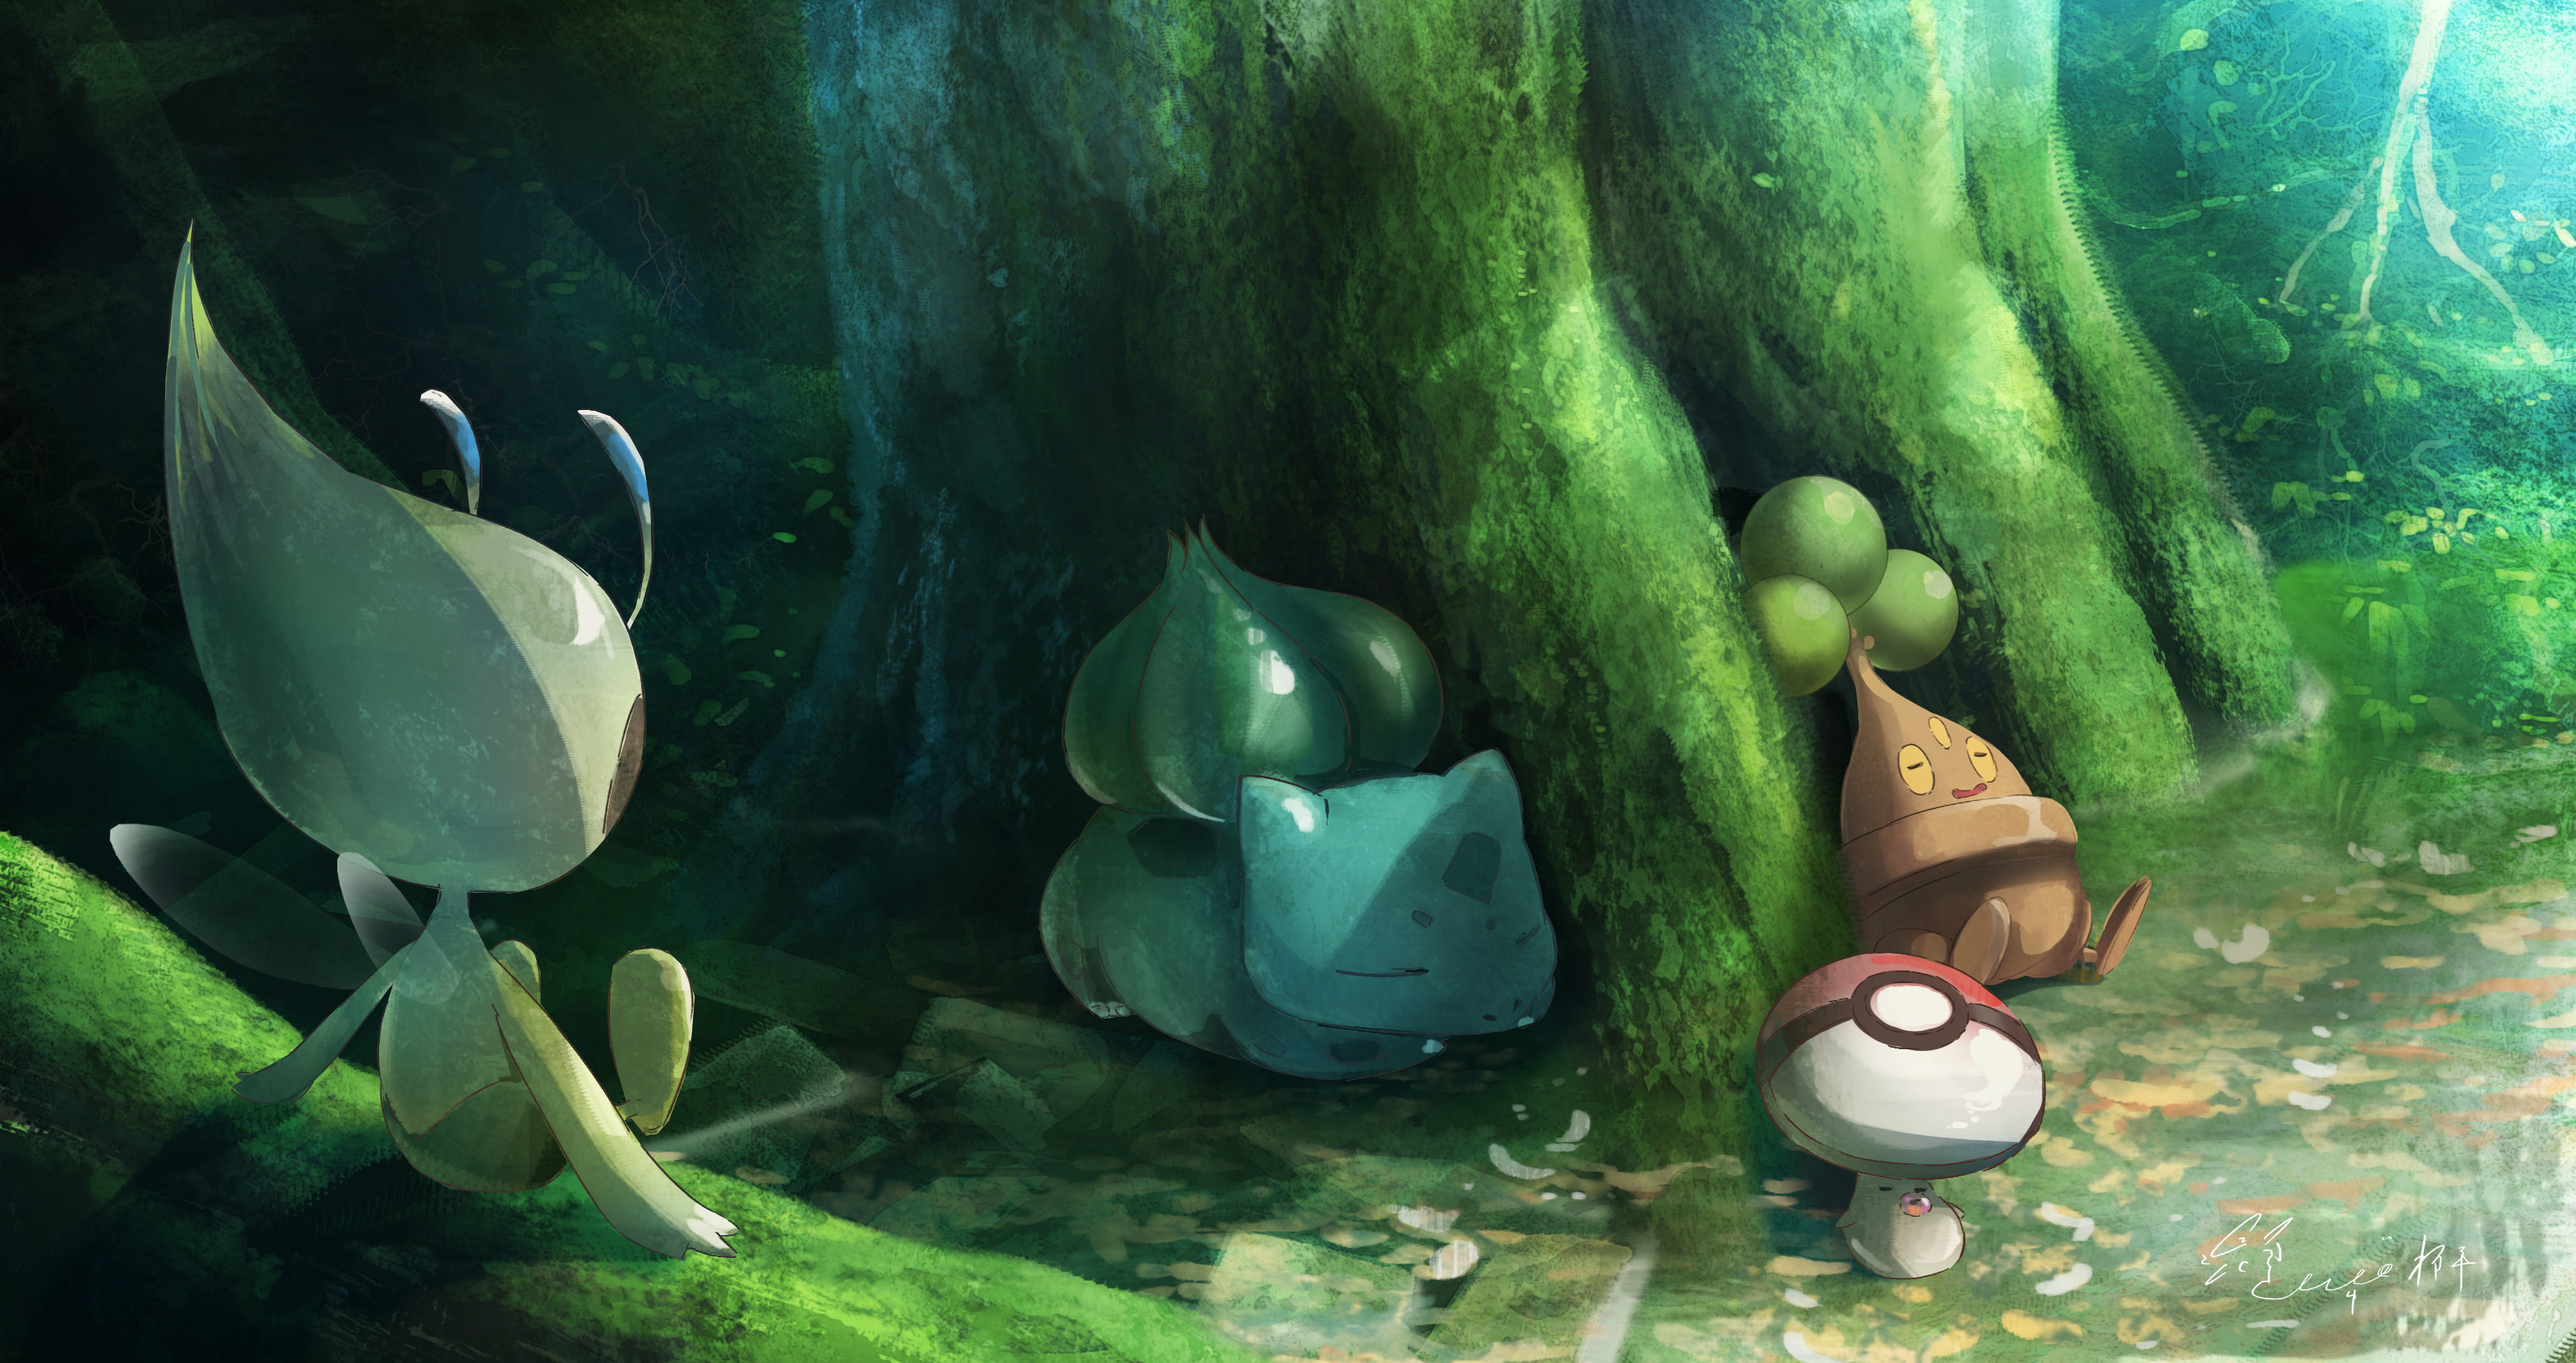 Pokemon Napping in the Forest by まんぷくア